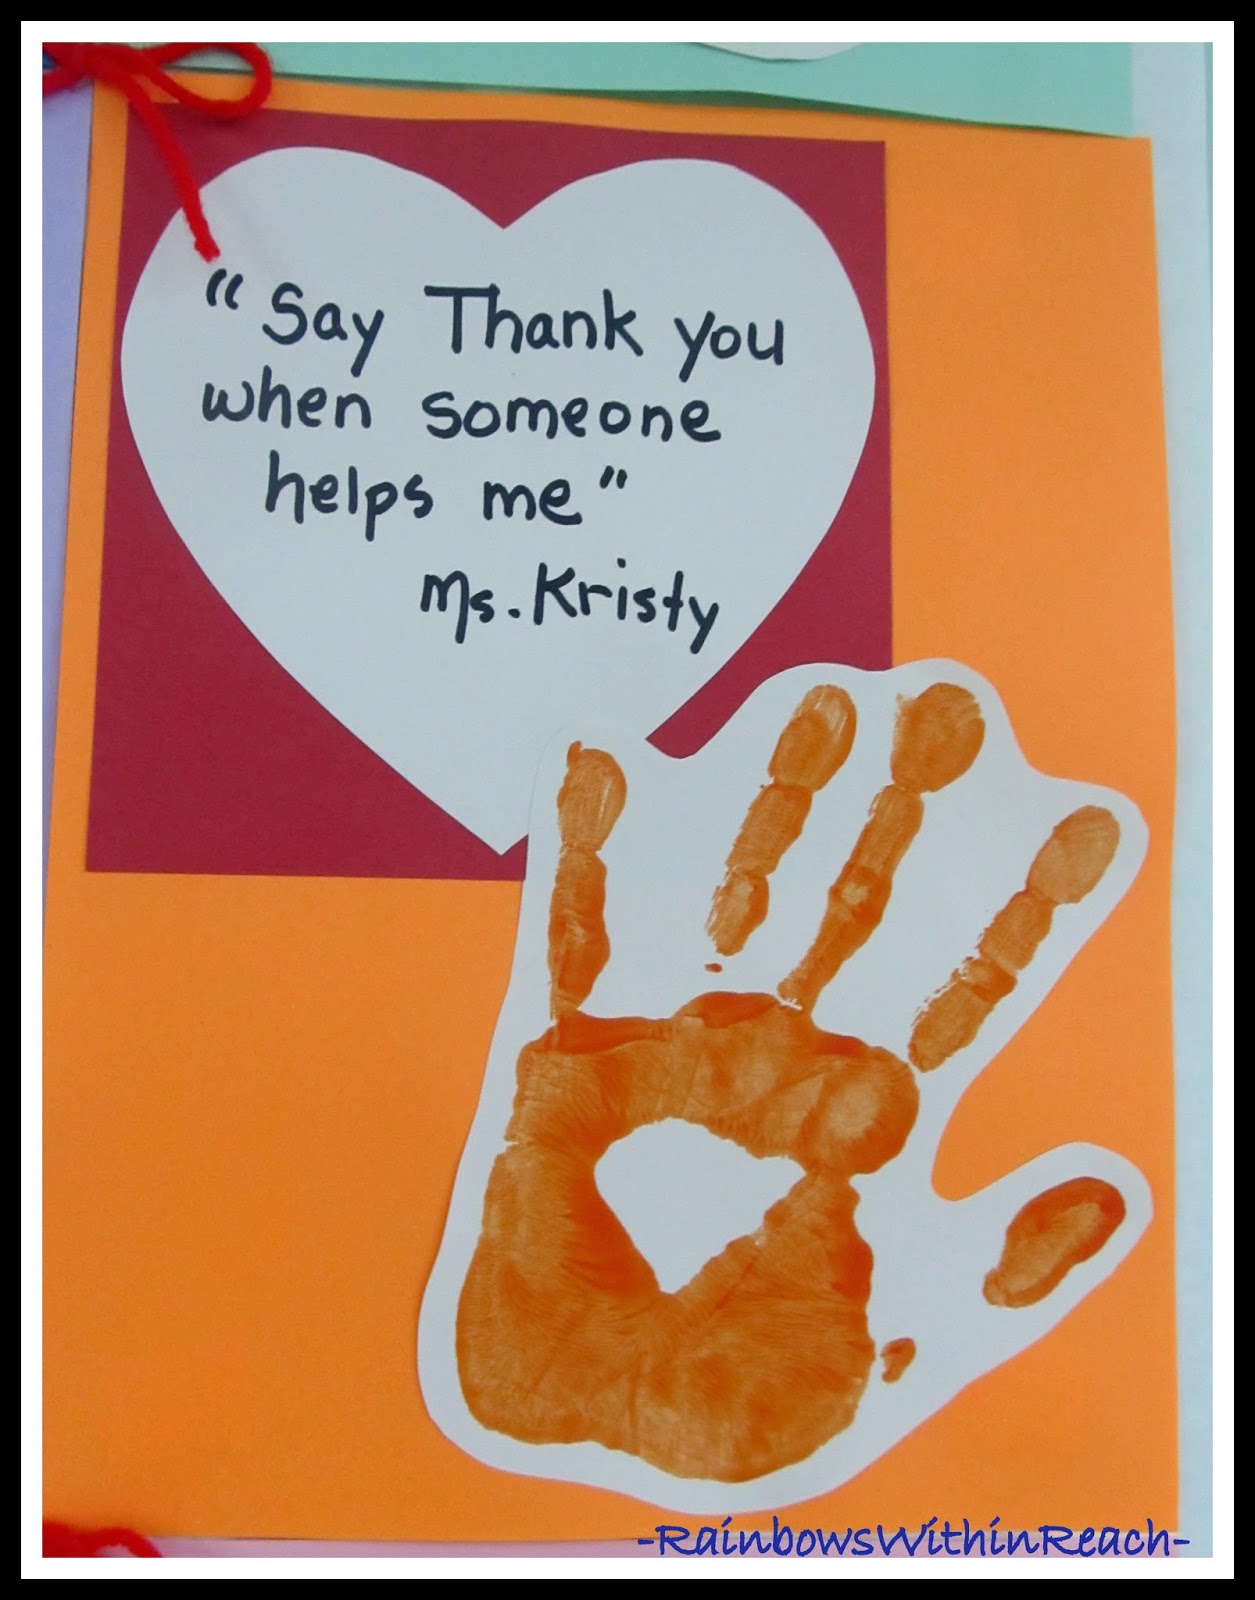 "Our Kindness Quilt" Preschool Handprints and Rules thru the eyes of the Children